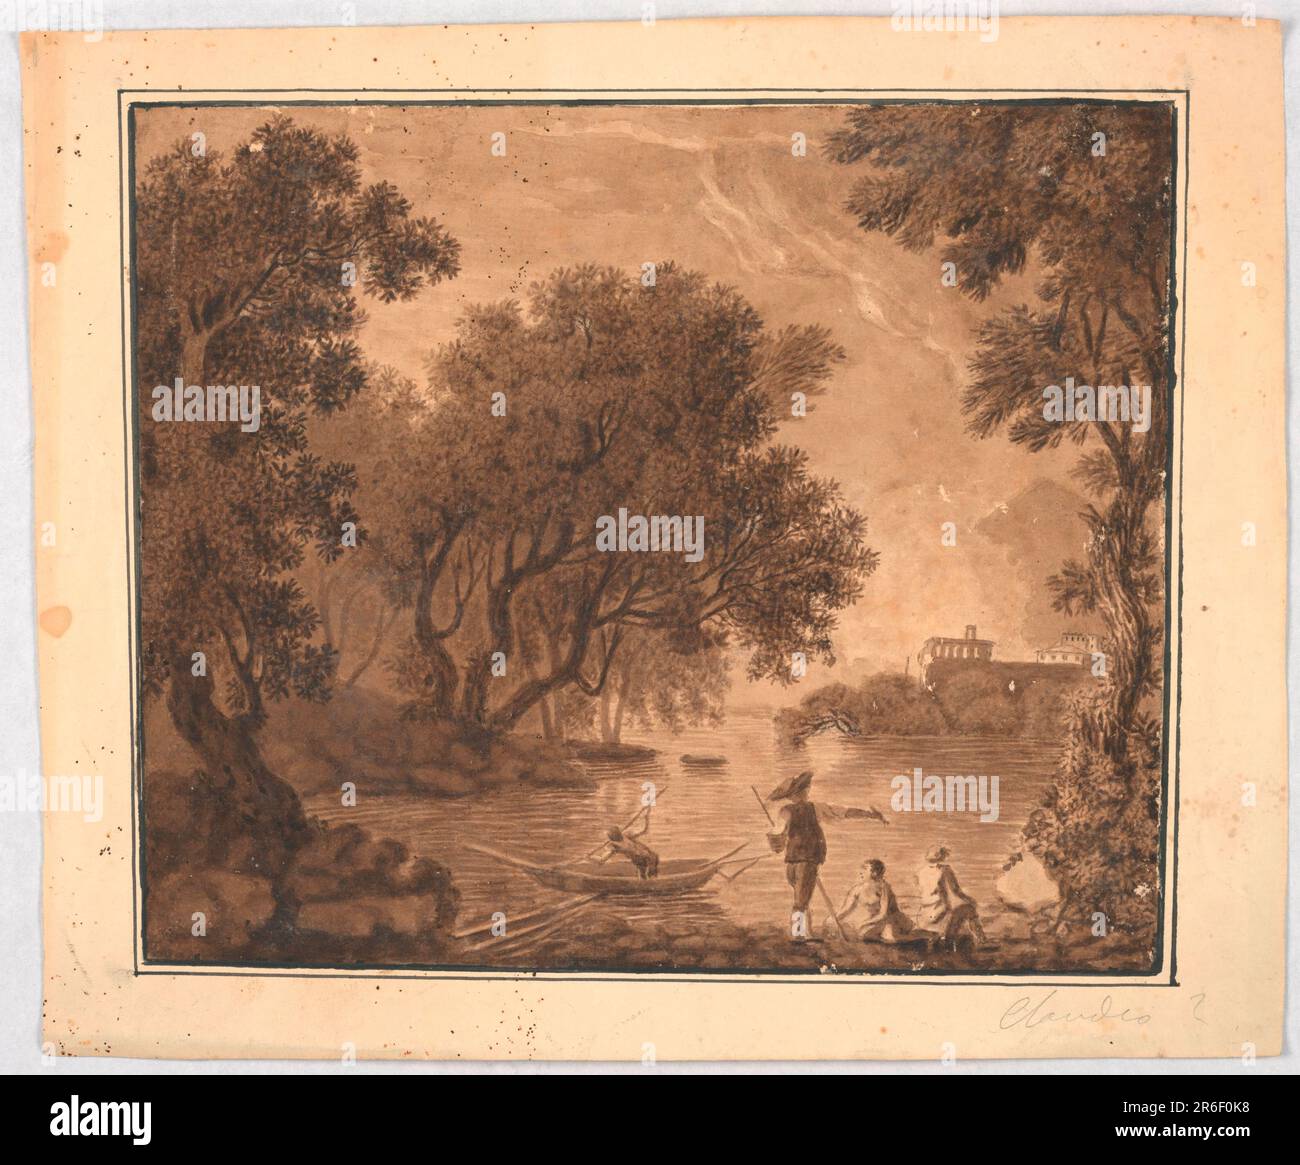 A scene framed by trees. A group of four men at the edge of a body of water. One stands in a boat spearing a fish. Two buildings visible on elevated land in the background. Date: 1770-1786. Pen and brown ink with brown wash on off-white paper, lined. Museum: Cooper Hewitt, Smithsonian Design Museum. Stock Photo